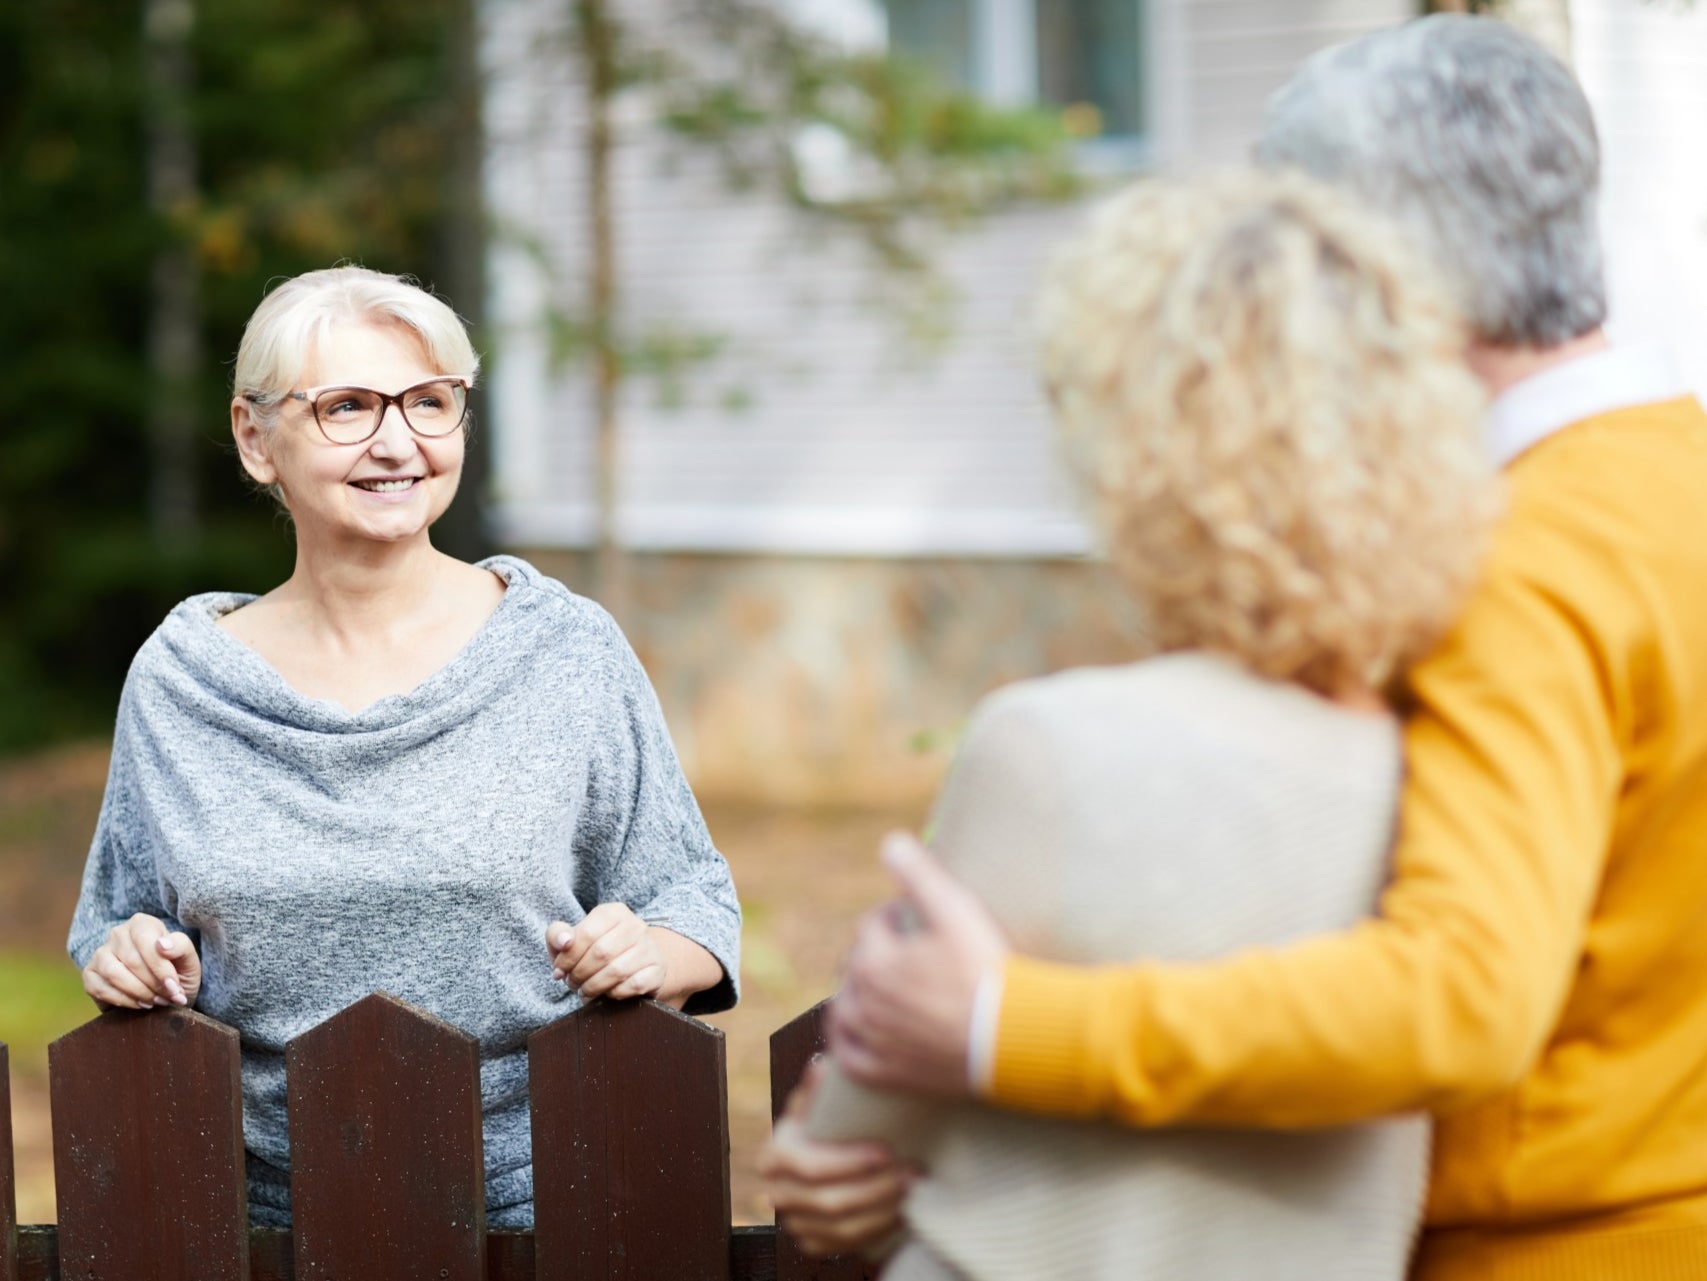 Talking to neighbours more is a key change people plan to make